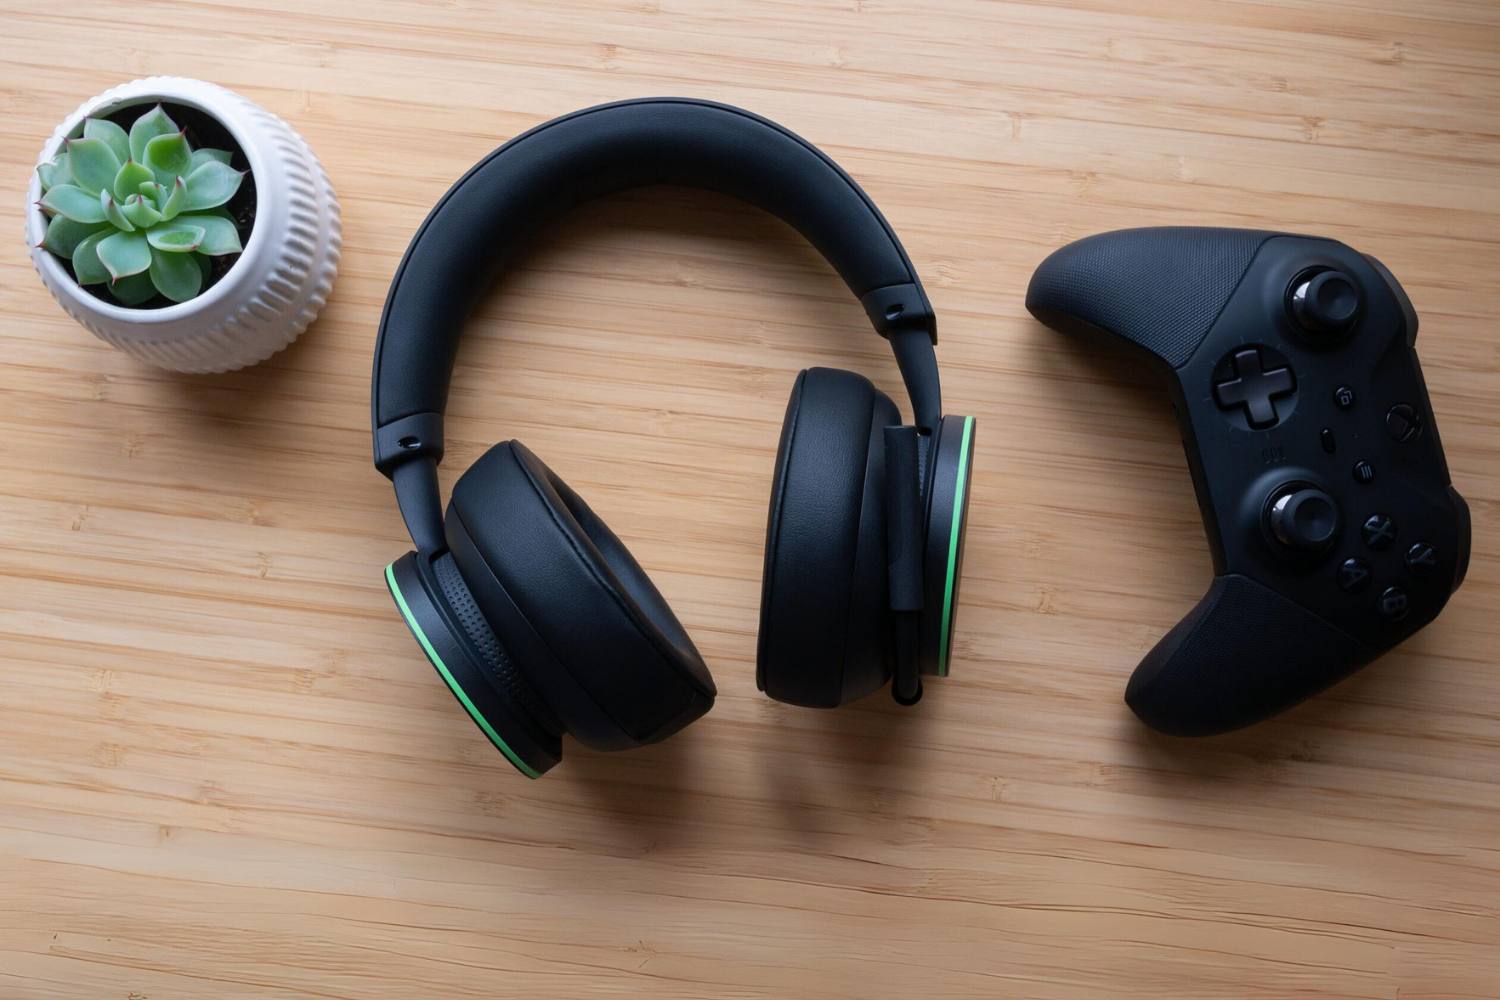 How To Use Gaming Headset On Xbox